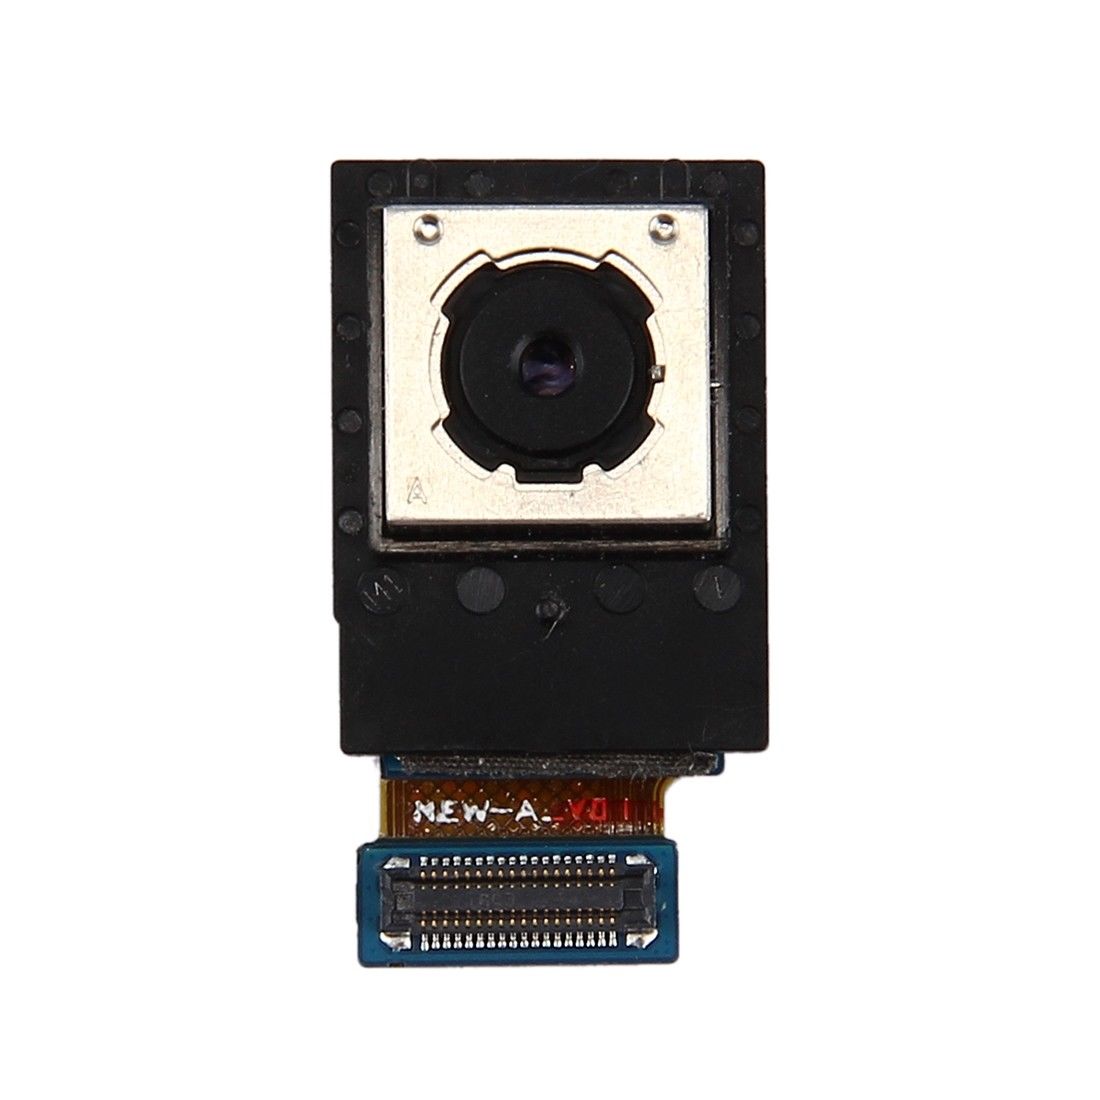 Samsung Galaxy A5 / A510 2016 - Genuine Rear Main Camera Module for [product_price] - First Help Tech